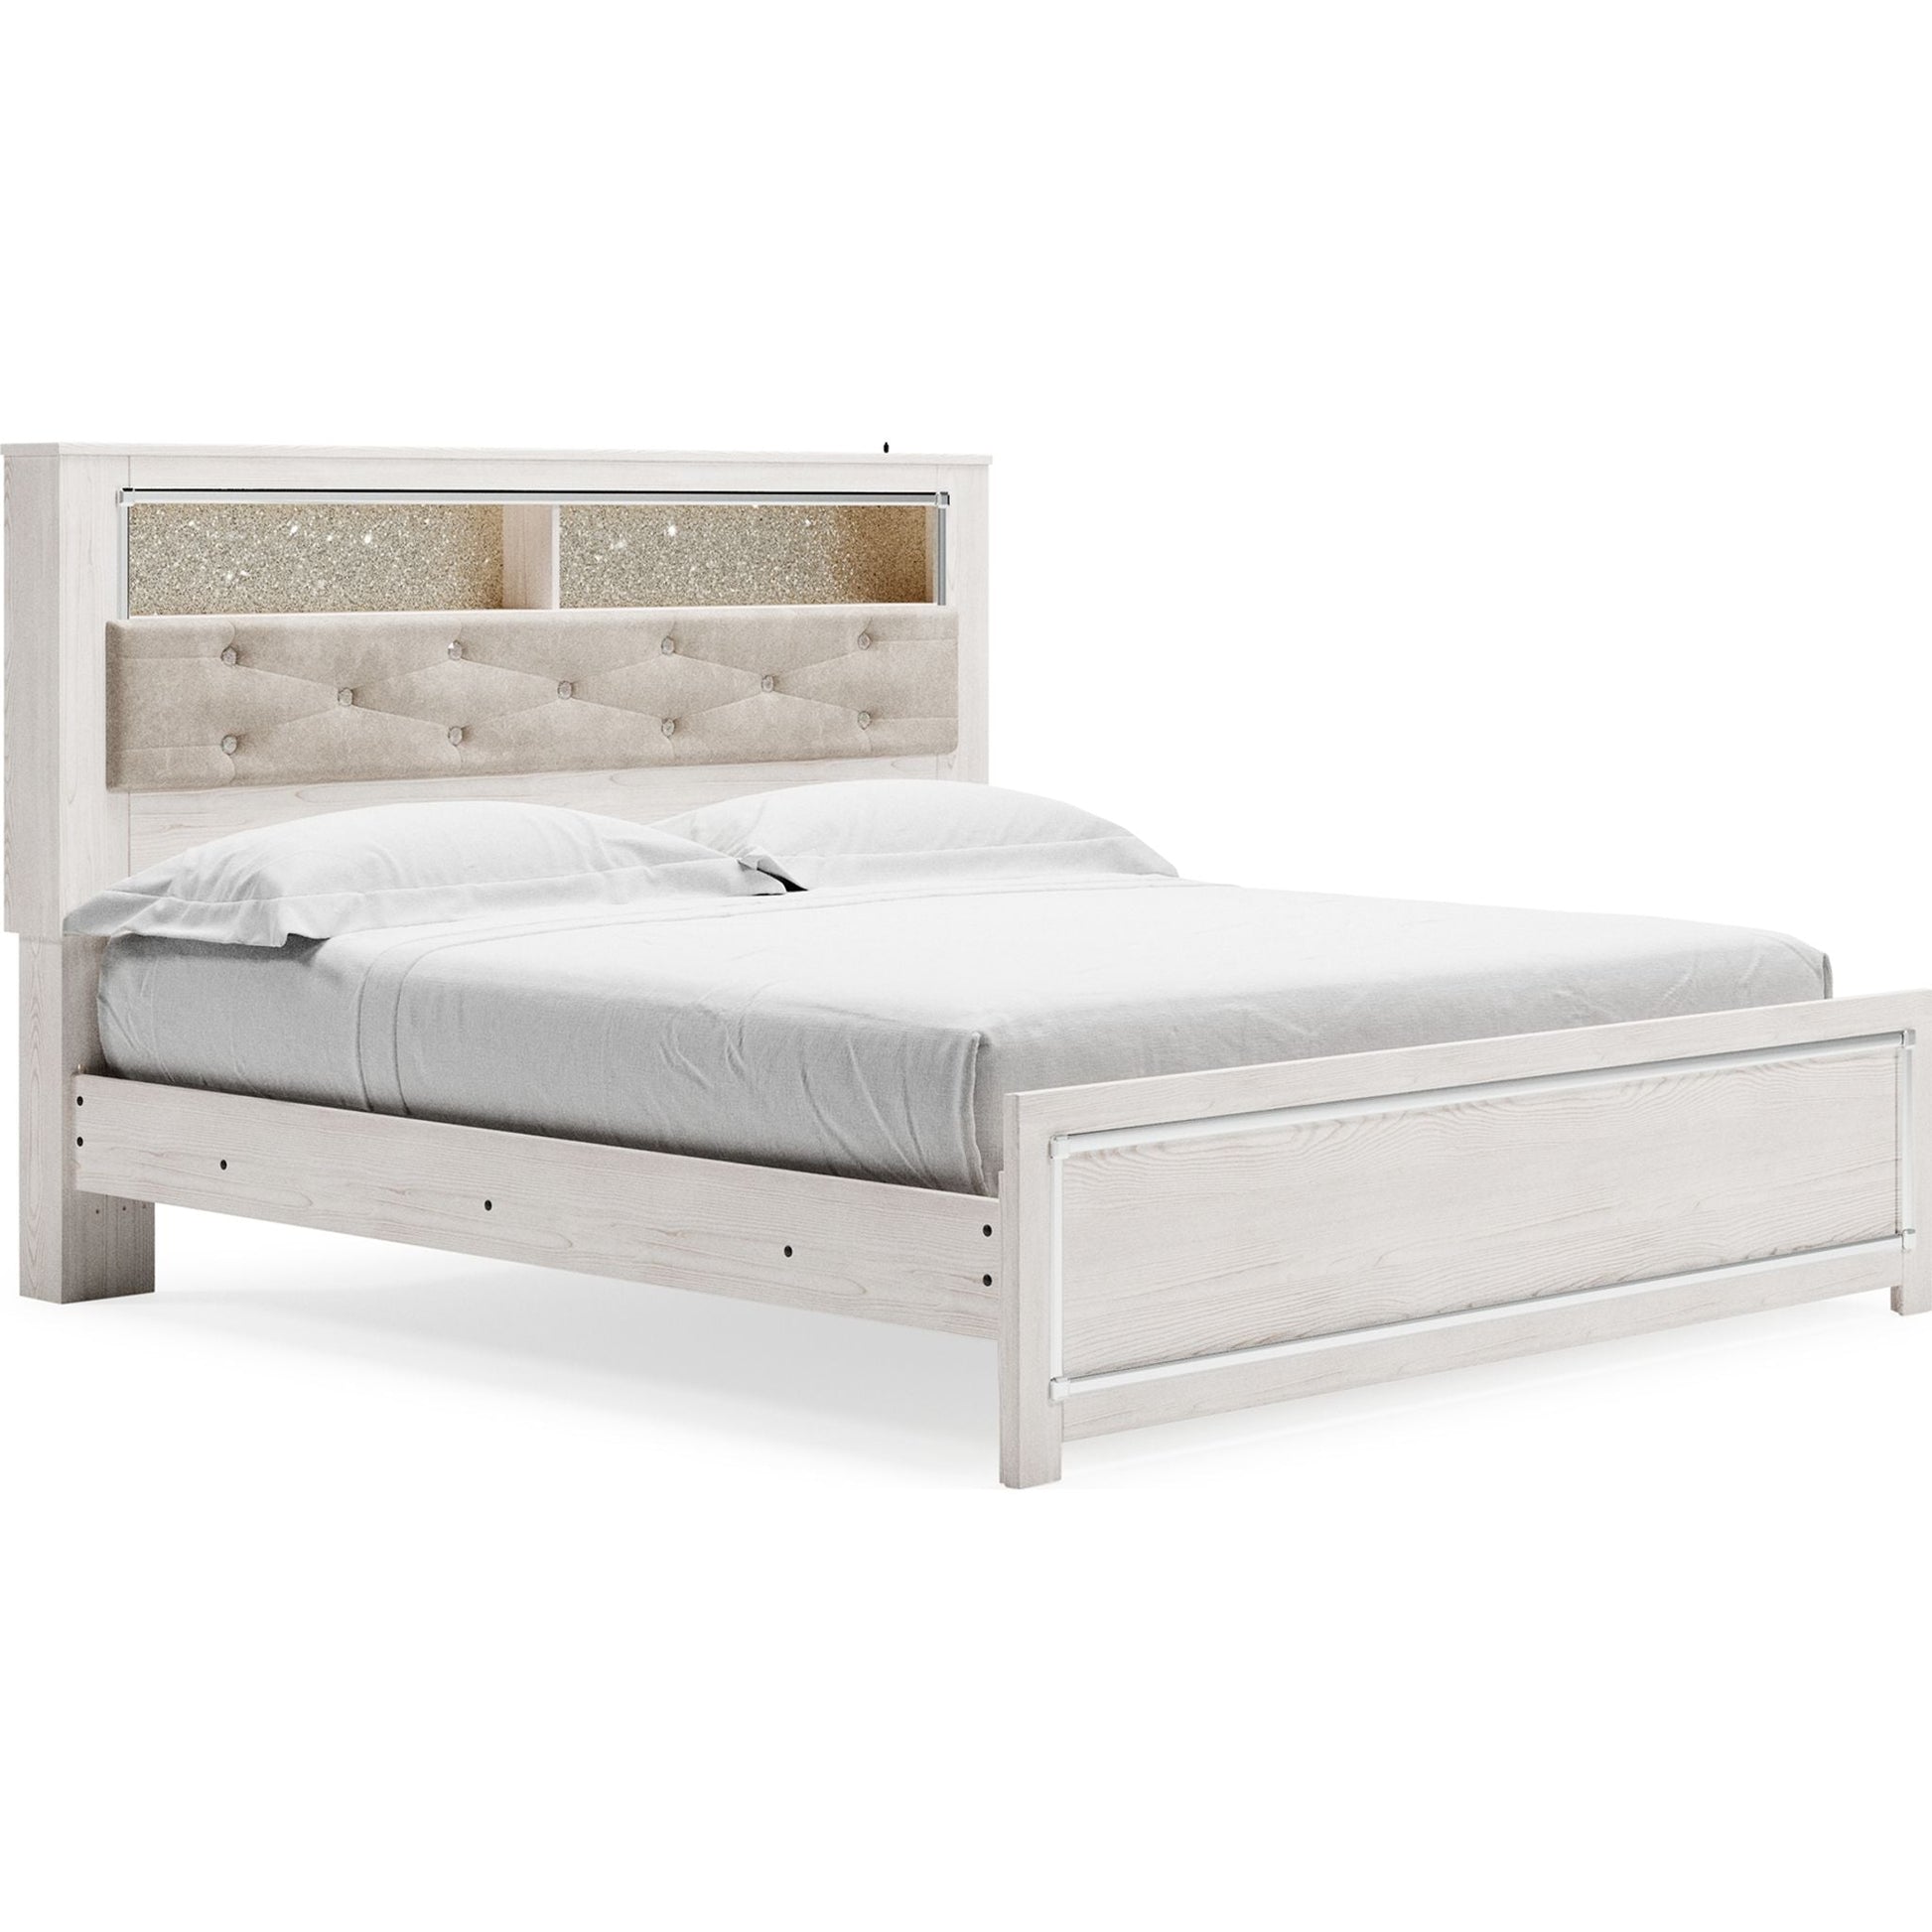 Oliah 3 Piece King Bed - White